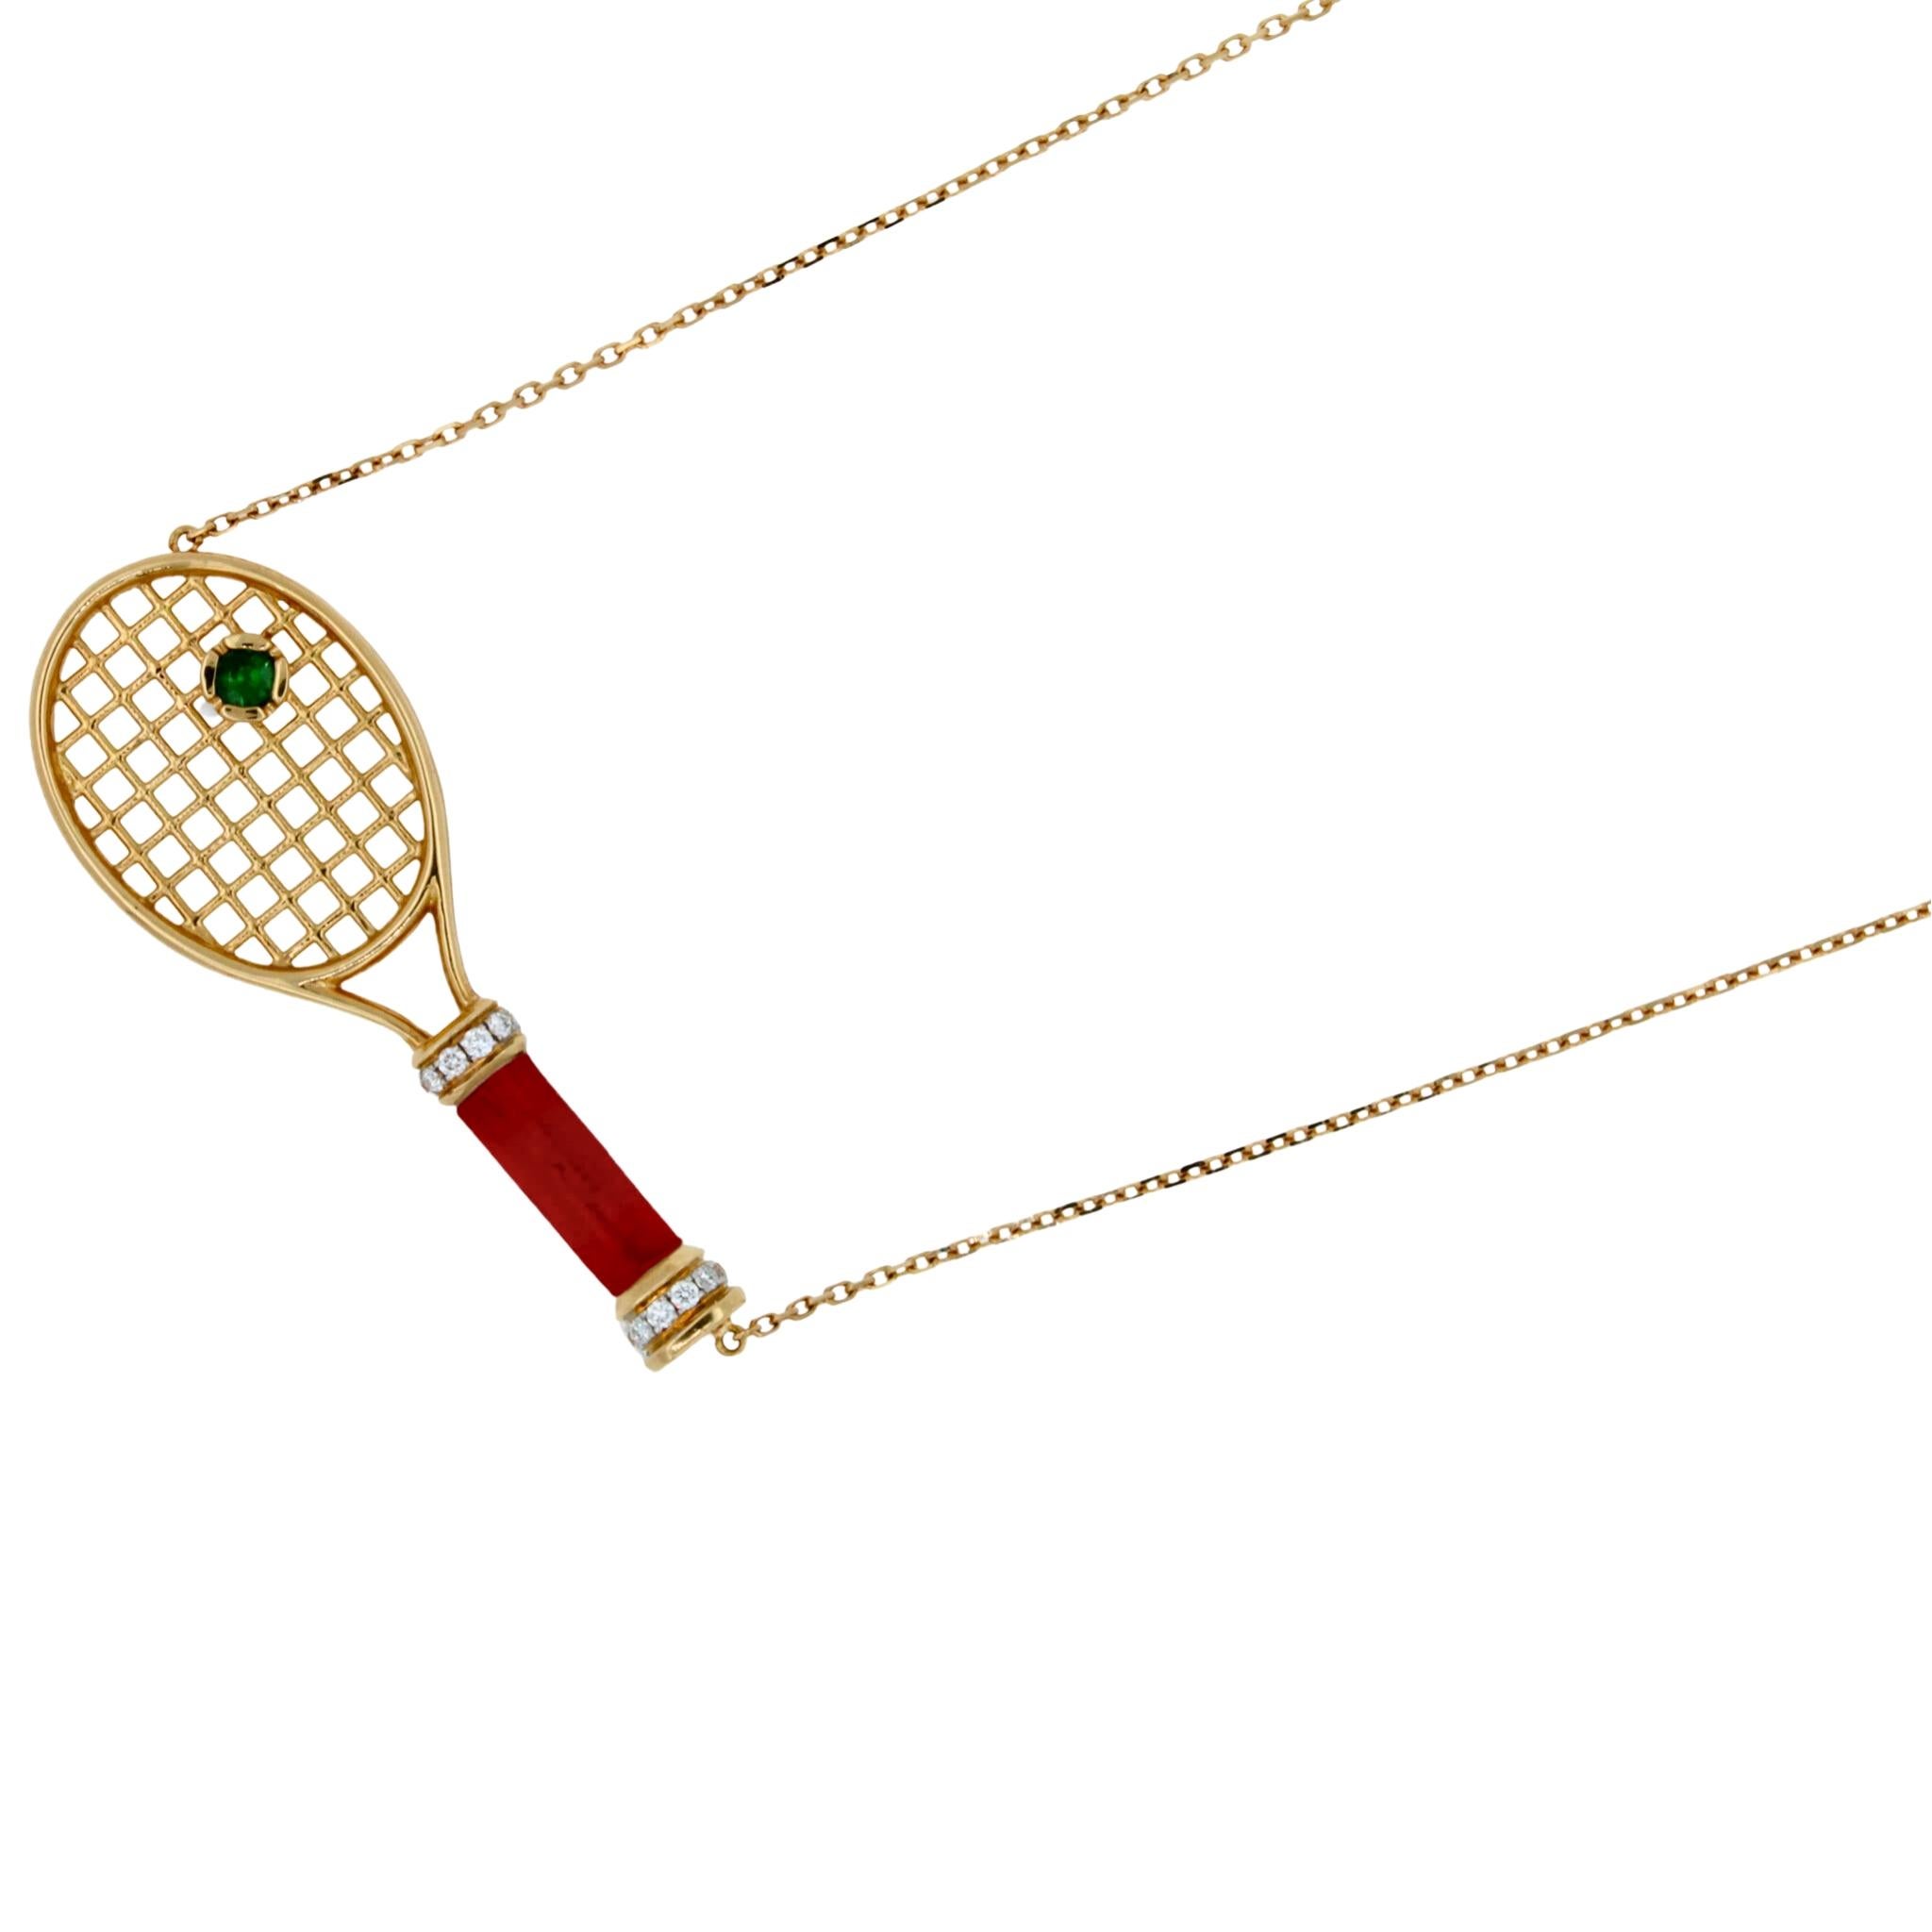 18K Rose Gold
Red Carnelian Gemstone Handle
Green Emerald Tennis Ball Gemstone
0.25 cts Diamonds
16-18 inches Diamond-Cut Link Cable chain length
In-Stock
This is part of Galt & Bro. Jewelry's exclusive, custom made-to-order Ace Collection. We are